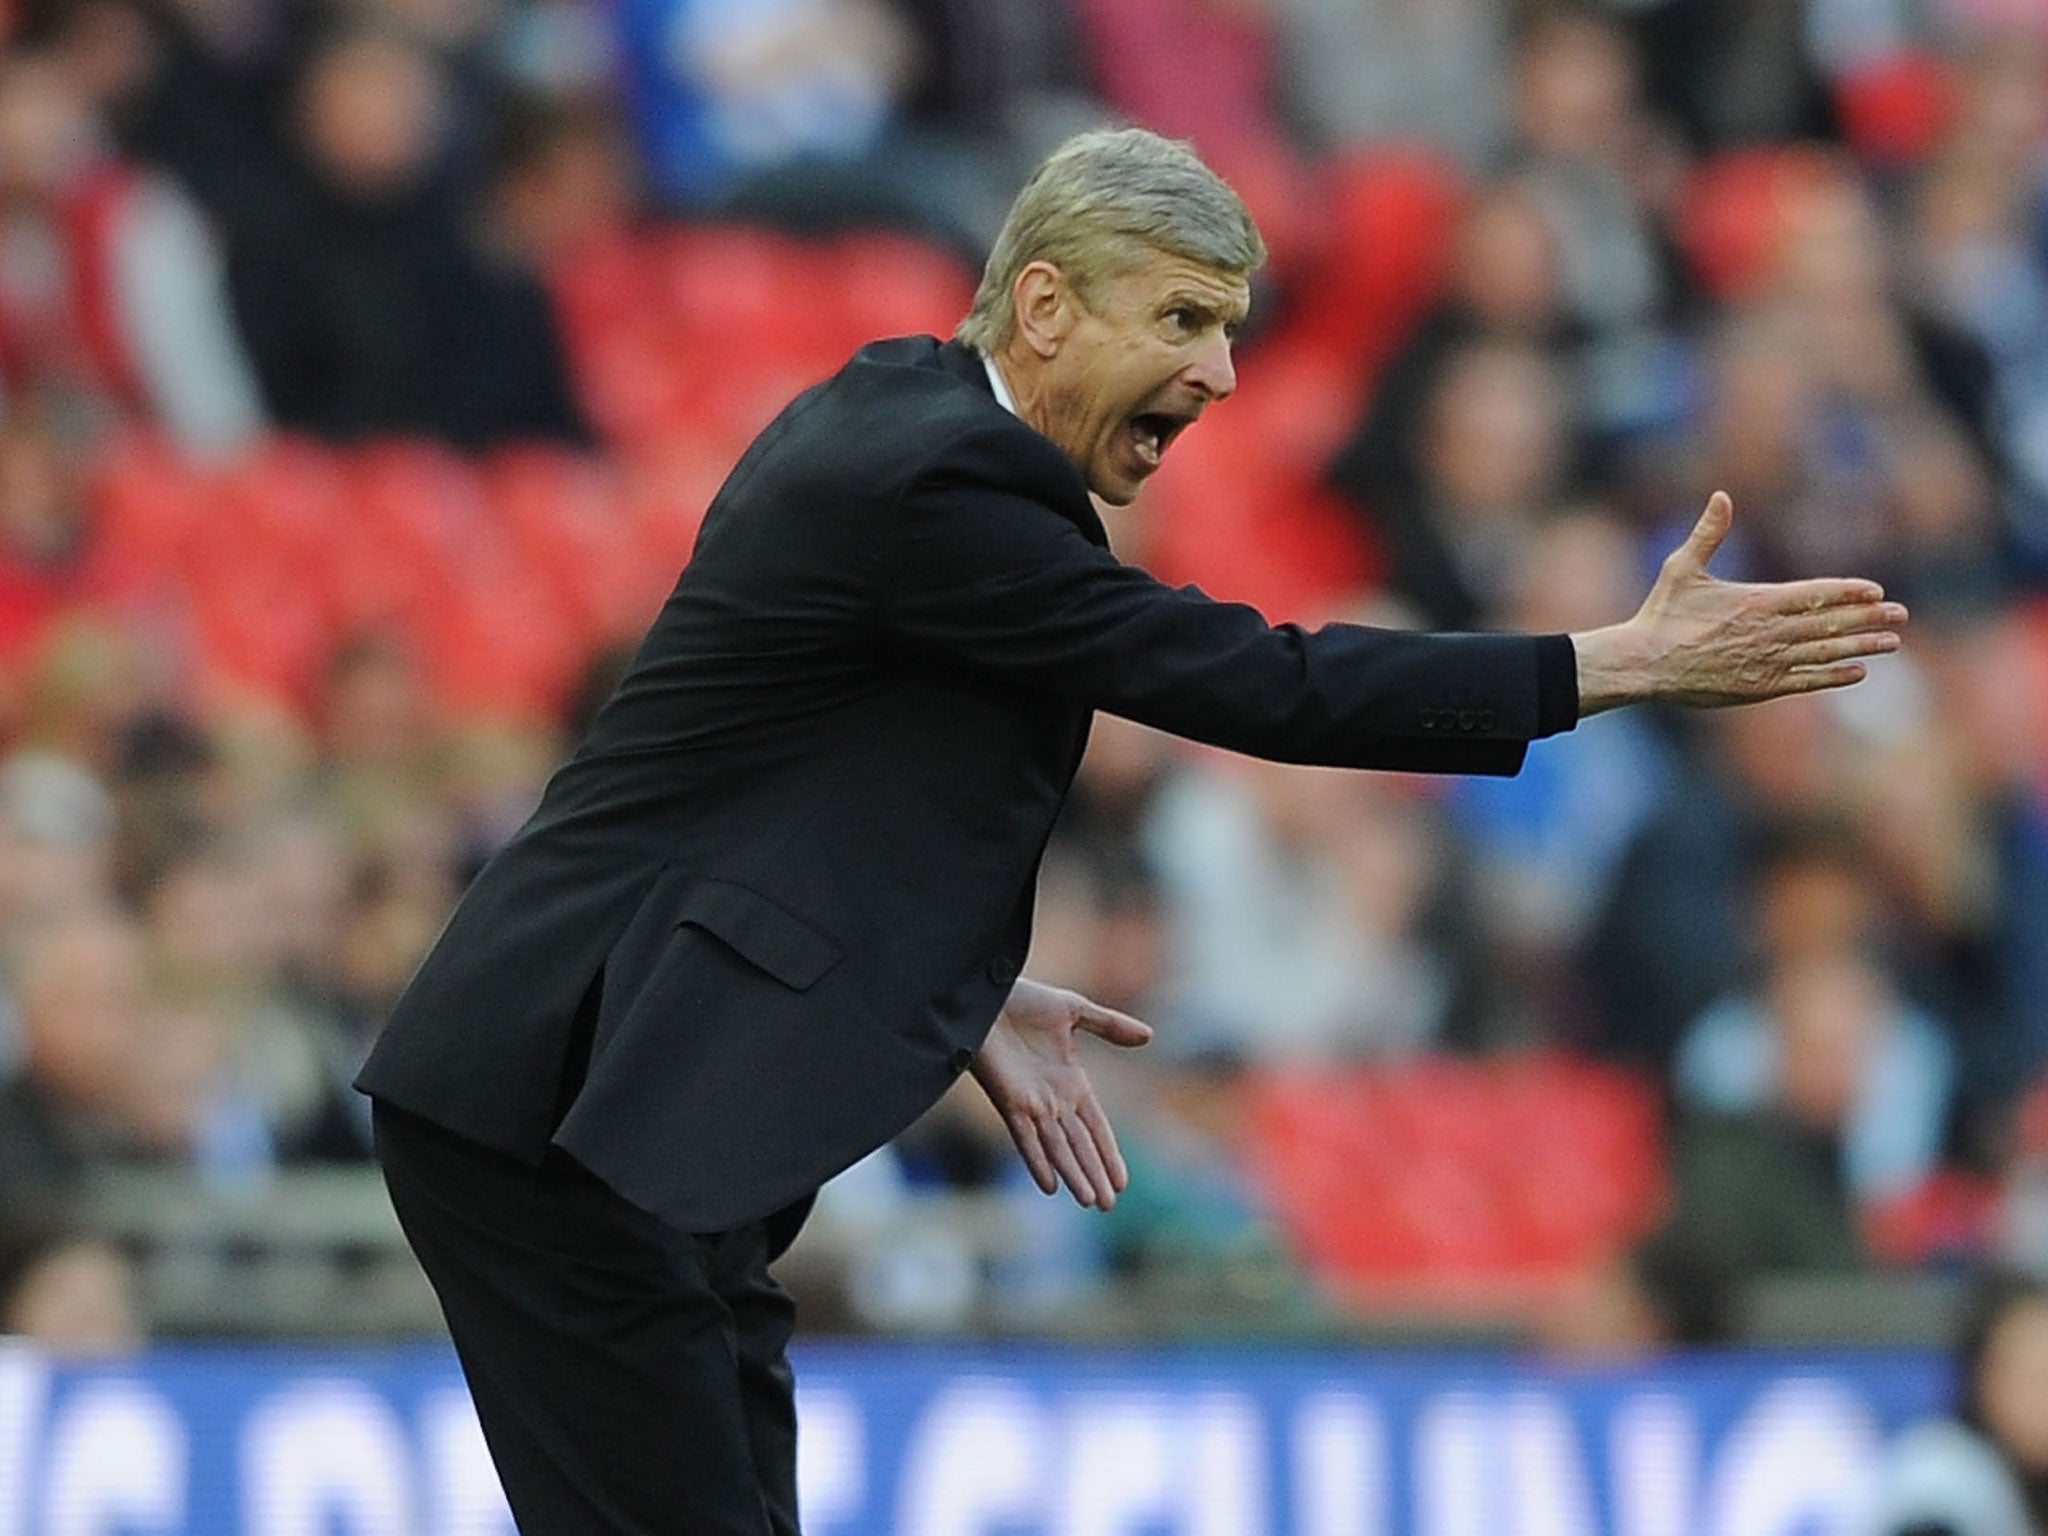 Arsene Wenger believes Arsenal do not get the same treatment as Chelsea